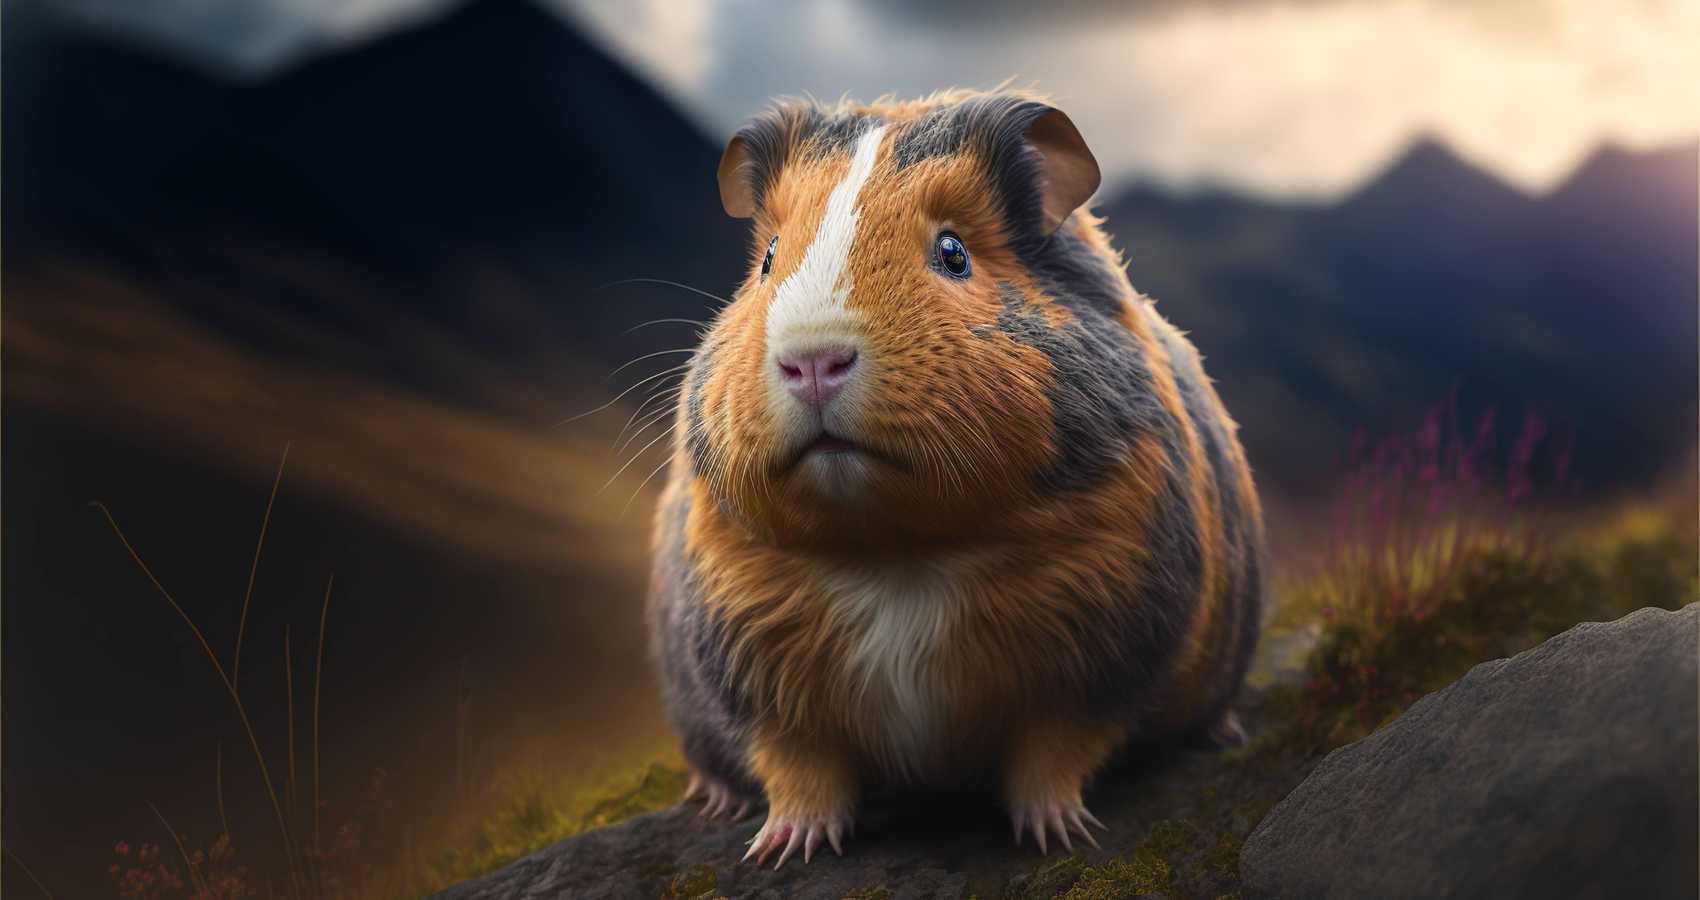 Guinea Pig, poetry by Dr. Alok Kumar Ray at Spillwords.com